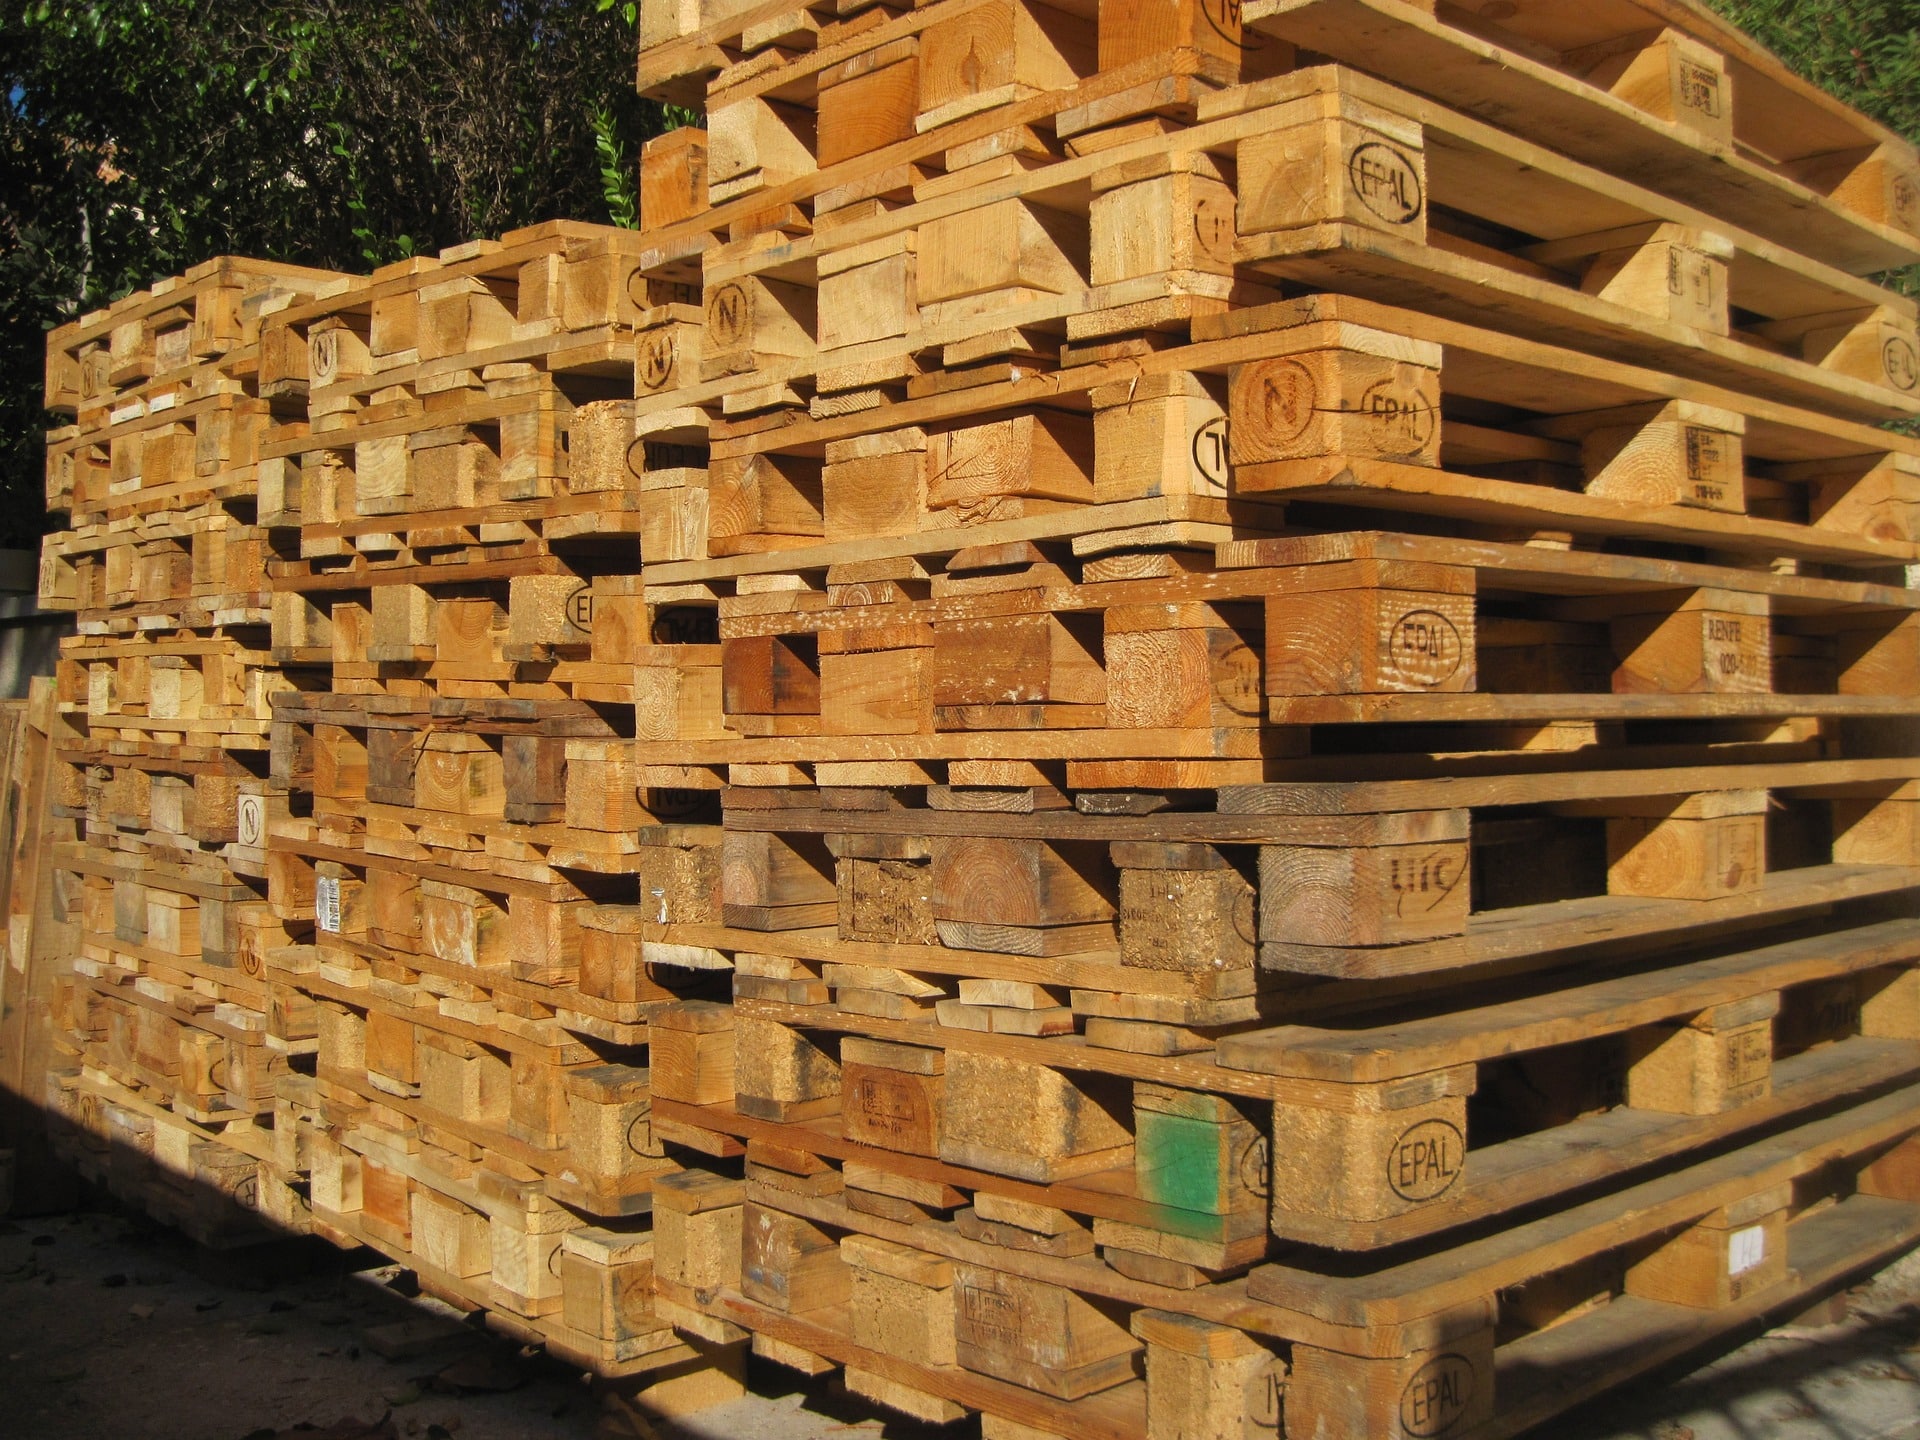 used wood pallets in Racine, high quality used wood pallets, reclaimed wood pallets near Racine